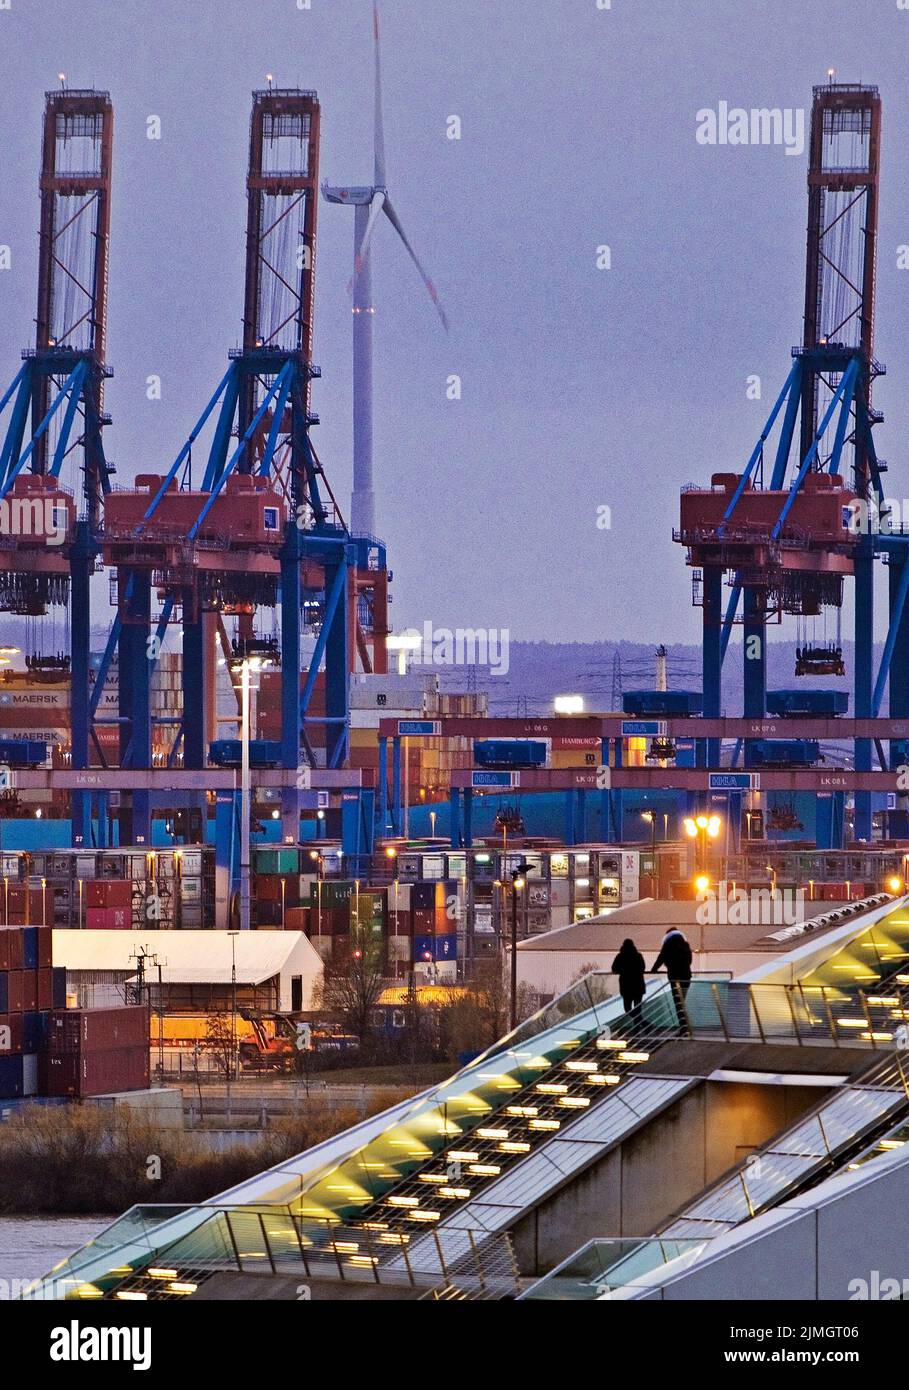 Loading cranes at the Burchardkai container terminal with people at Dockland, Hamburg, Germany Stock Photo